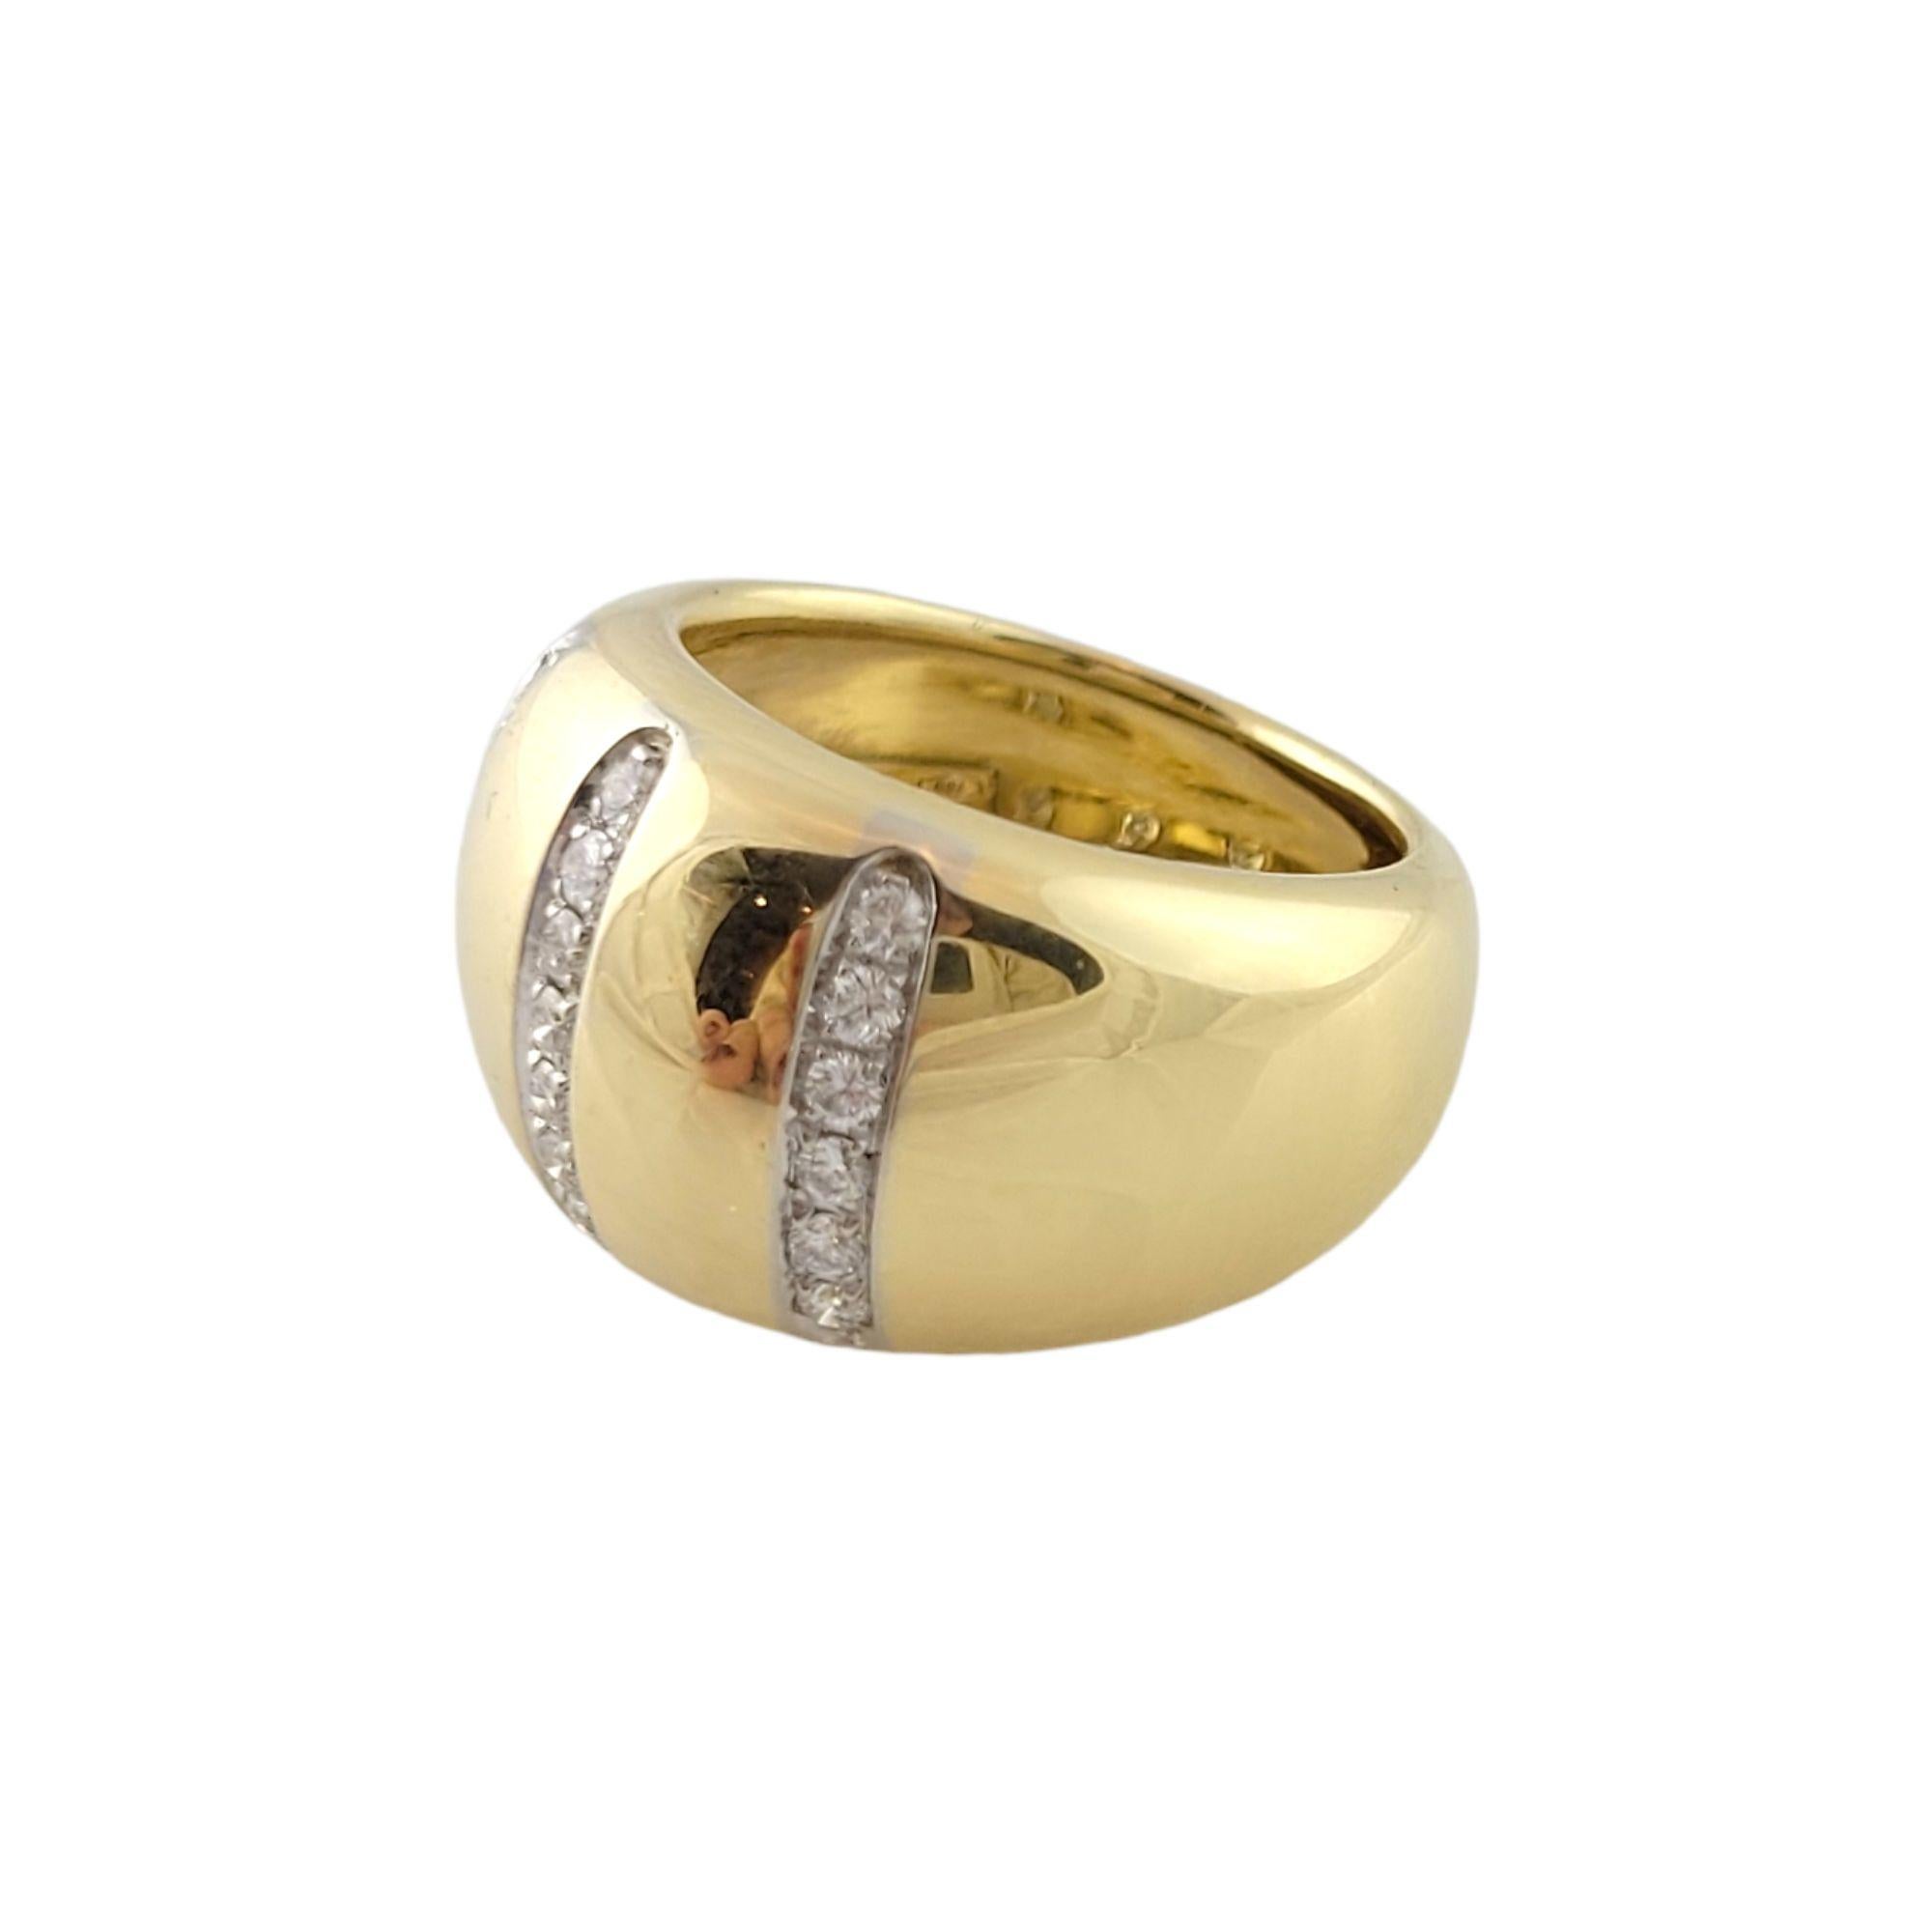 Vintage 18K Yellow Gold Diamond Rounded Edge Dome Ring Size 5.75

Beautiful rounded edge diamond ring decorated with 19 sparkling round brilliant cut diamonds set in 18K yellow gold!

Approximate total diamond weight: 0.45 cts

Diamond clarity: